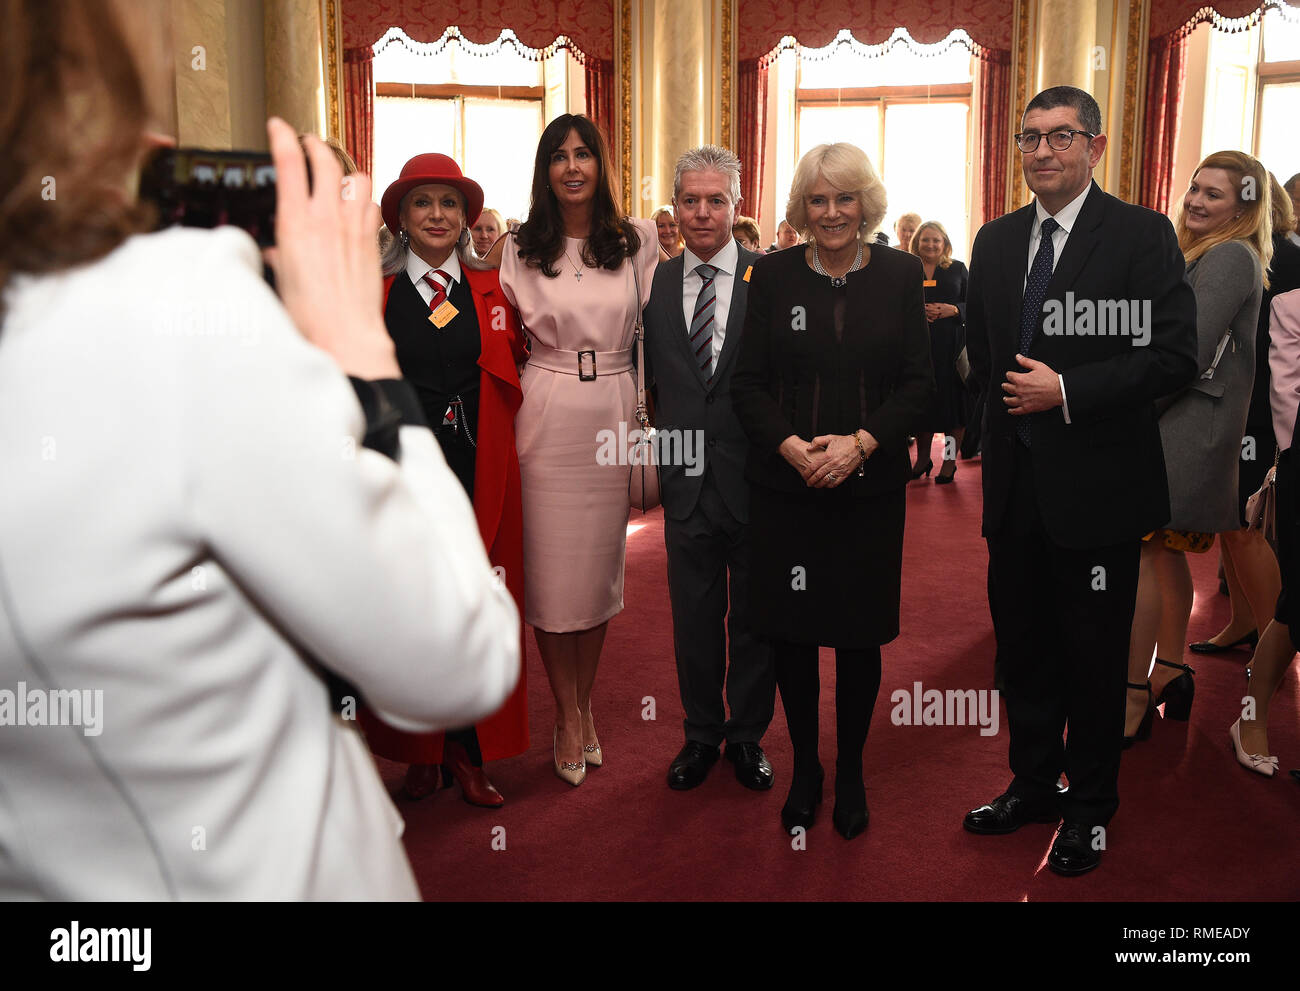 The Duchess of Cornwall poses for a photograph with members of the London Taxi Driver's Charity for Children at Buckingham Palace in London. Stock Photo